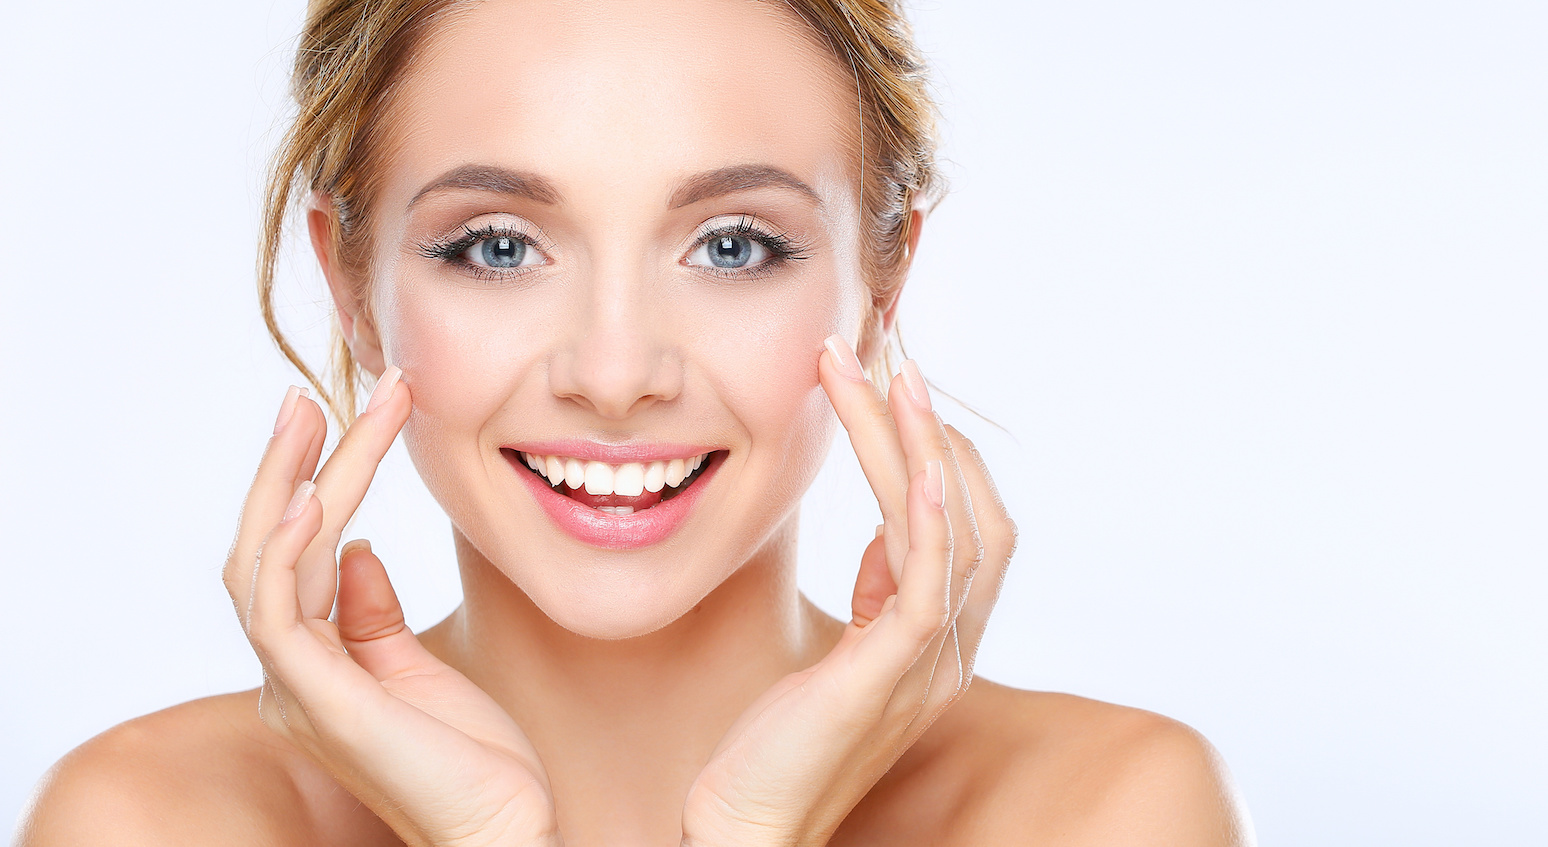 When Does Need For Facial & Implant Surgery Arises?